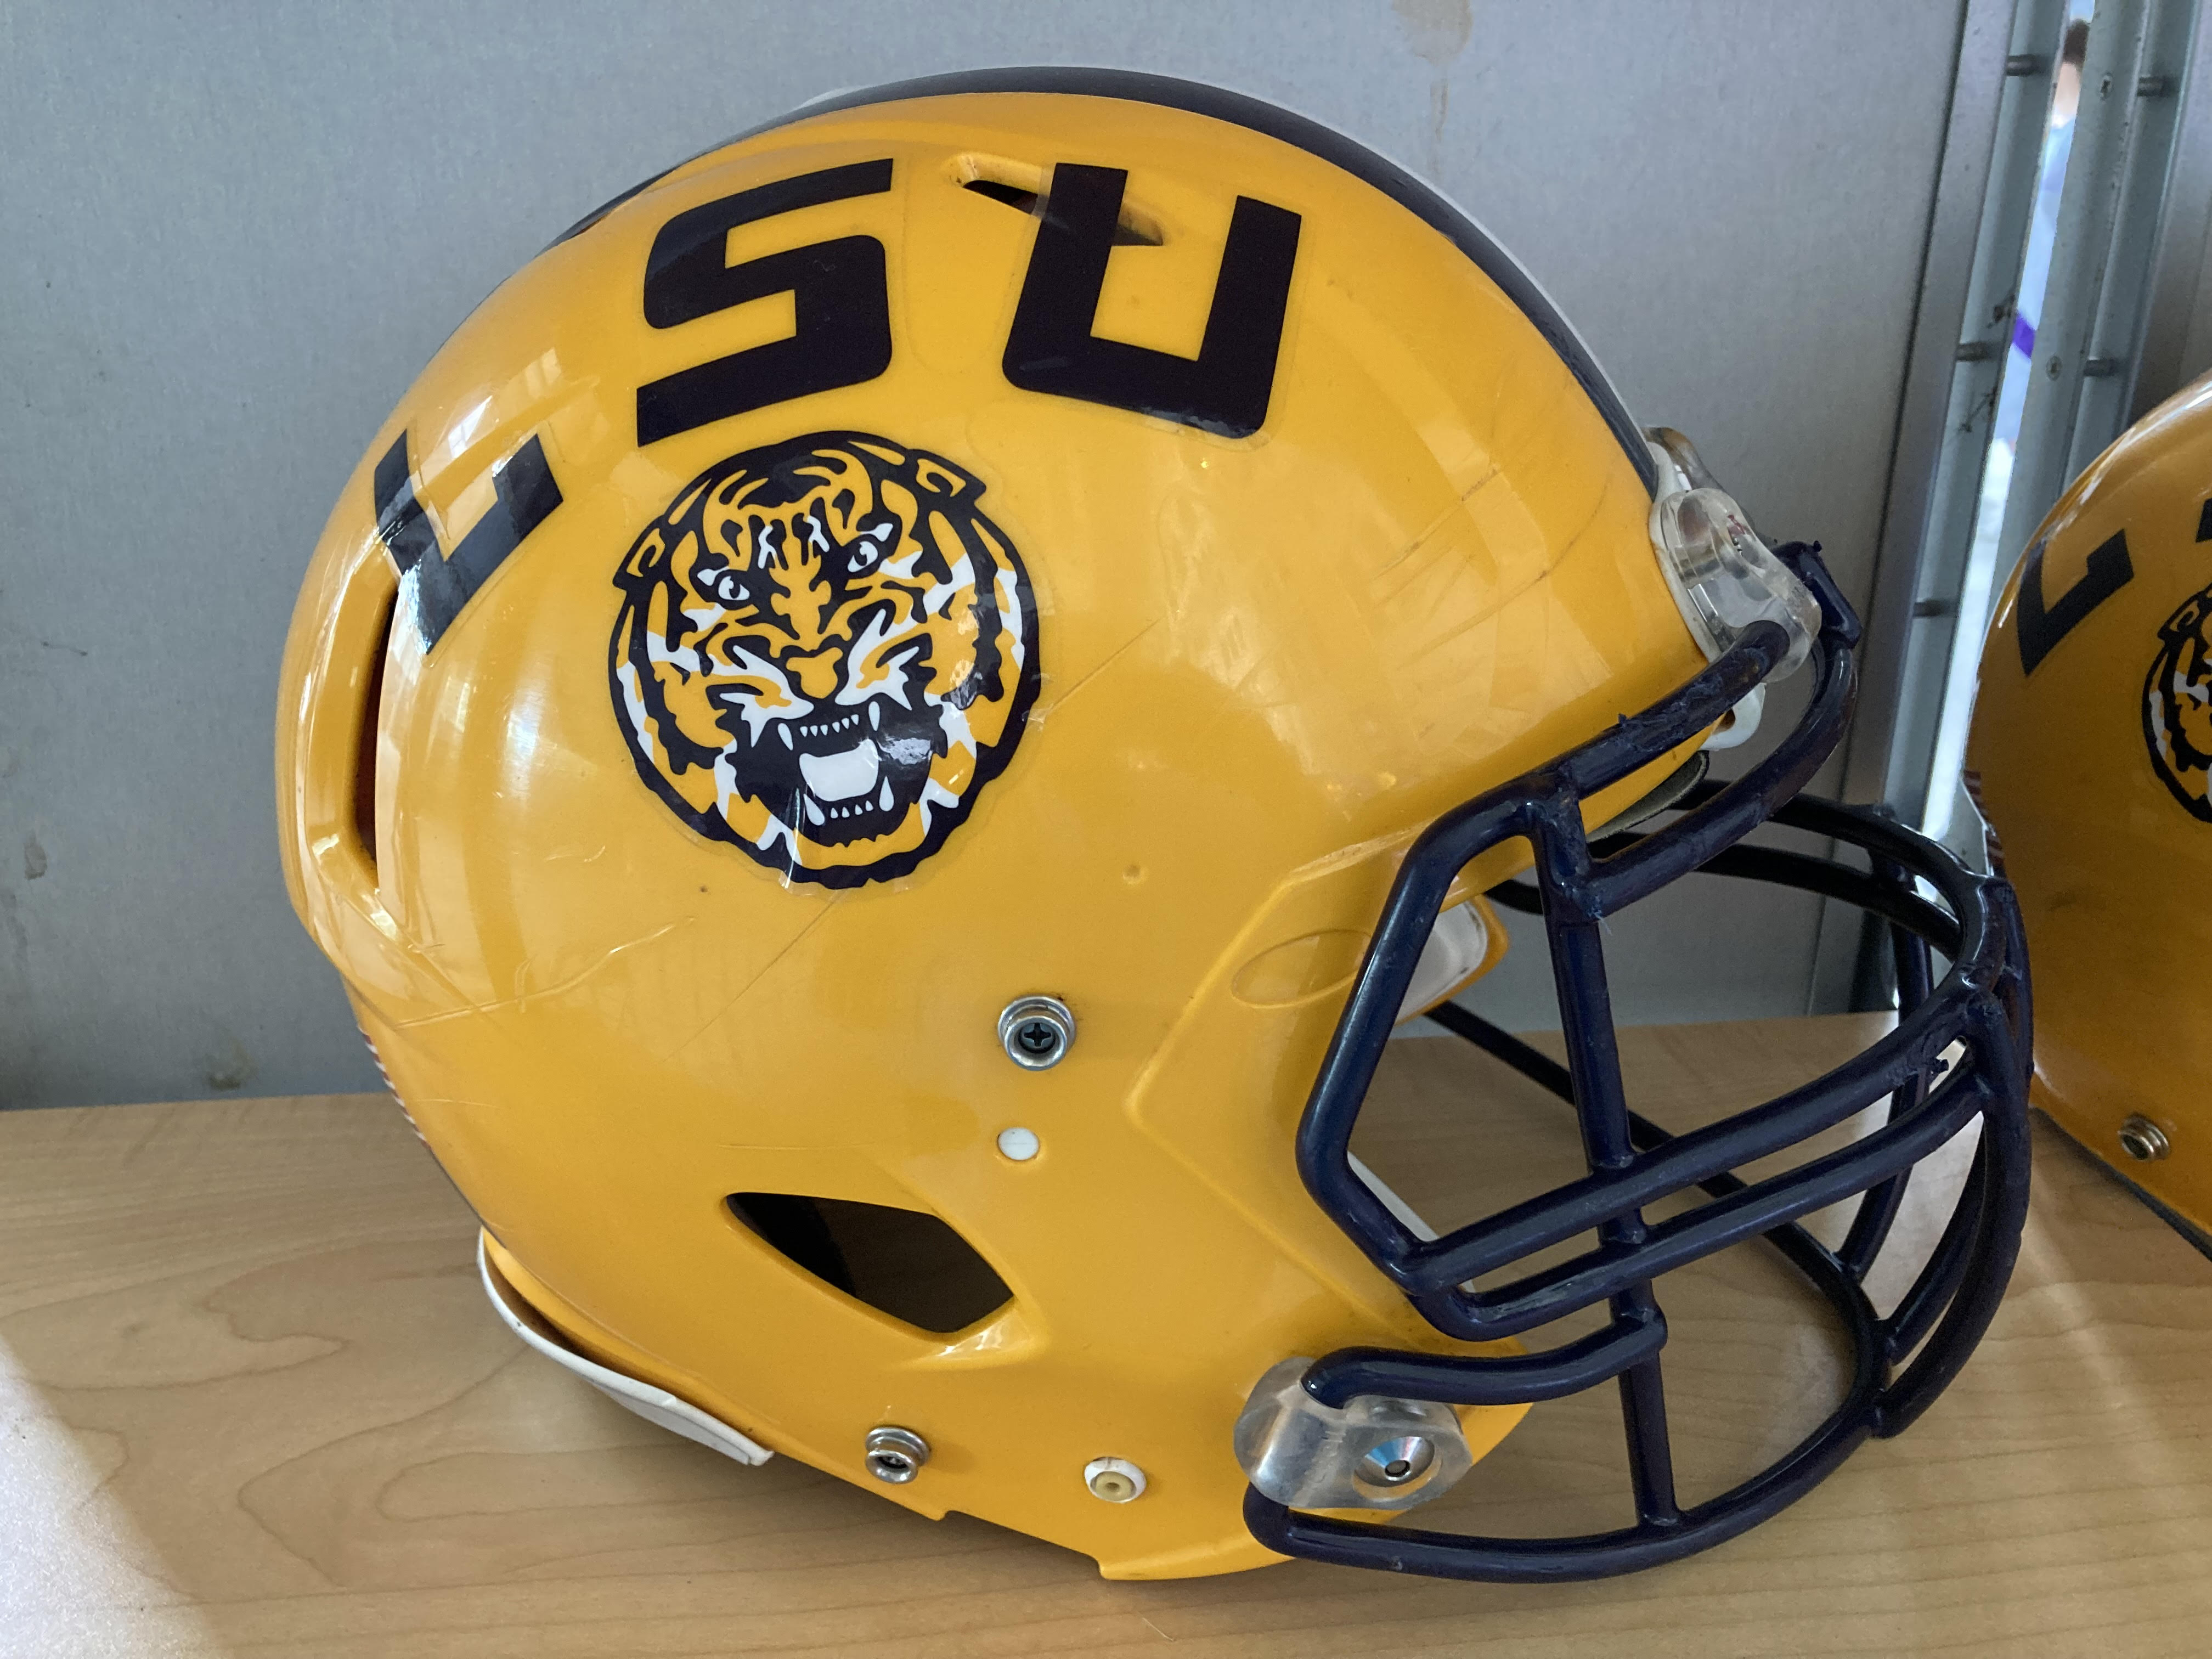 Game times set for LSU home opener with Grambling State, SEC opener at